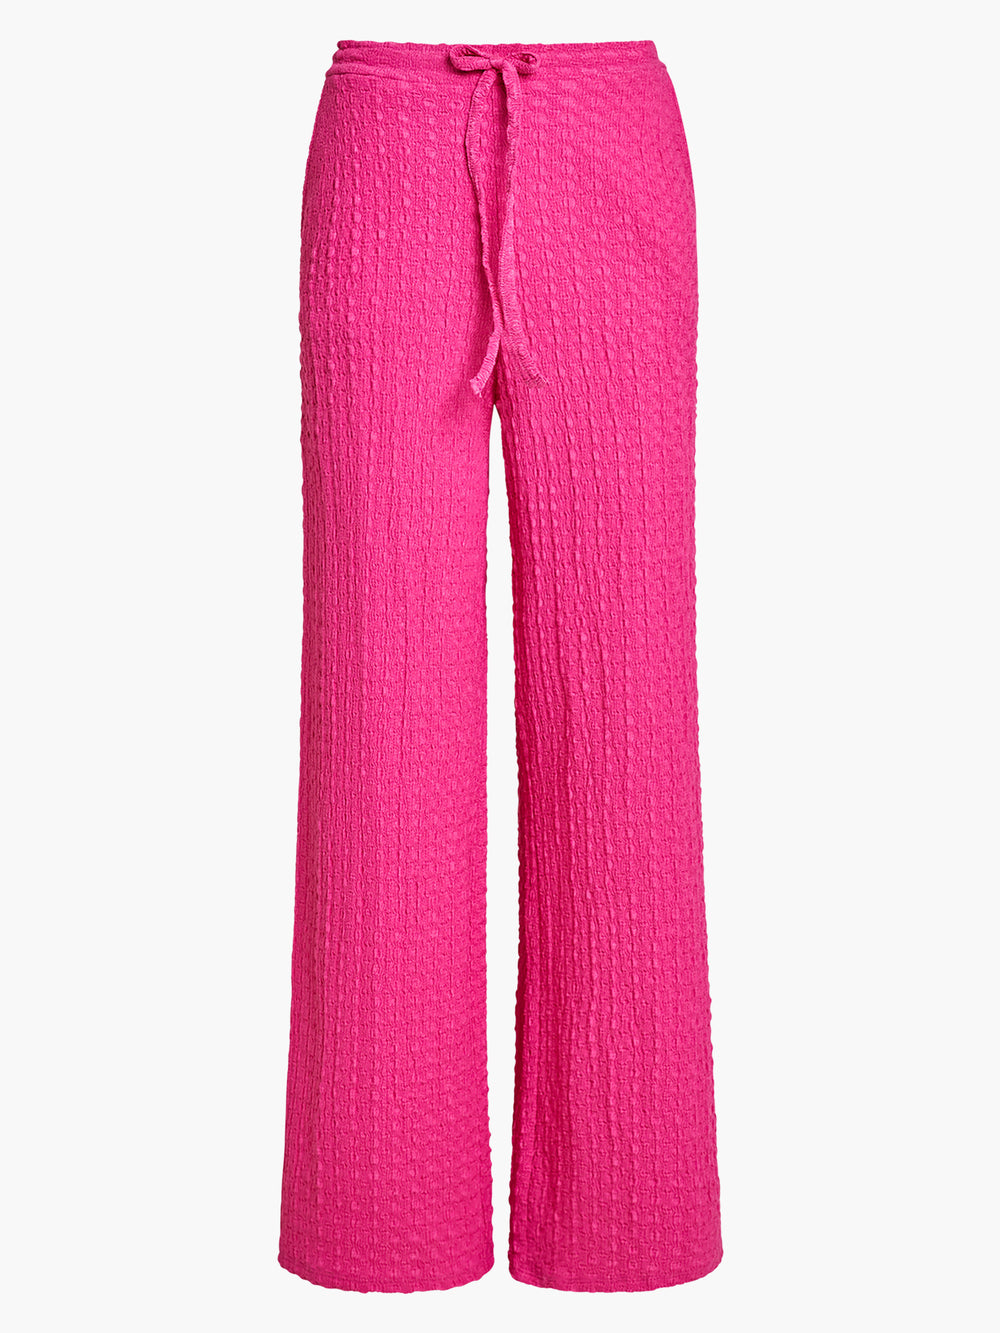 Tash Textured Trousers Fuschia | French Connection UK